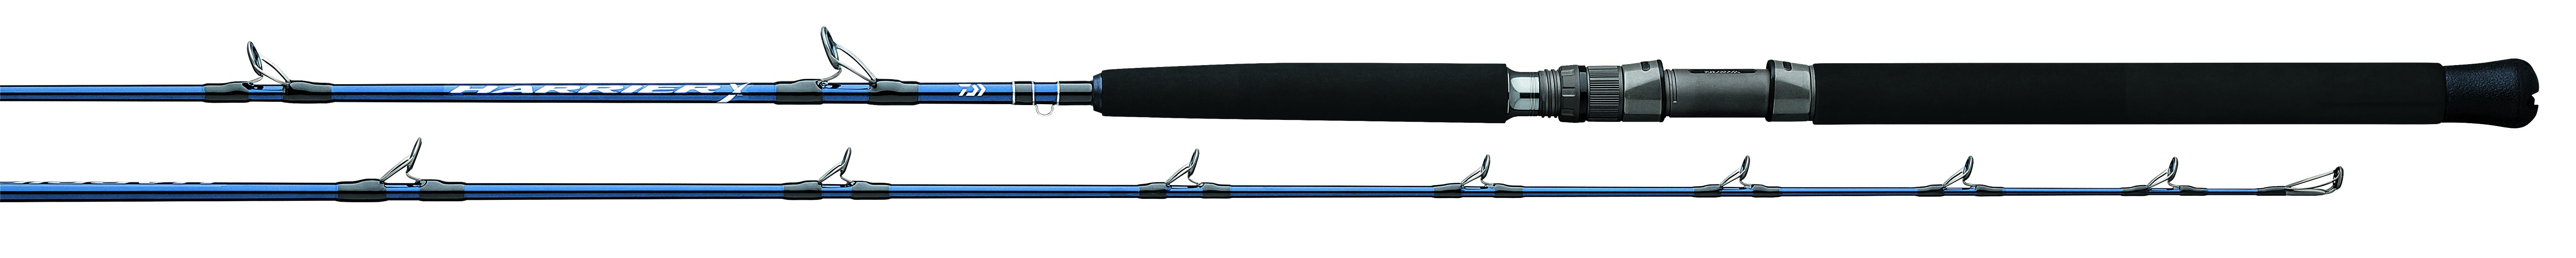 Daiwa Spinmatic-D Ultralight Pack Rods